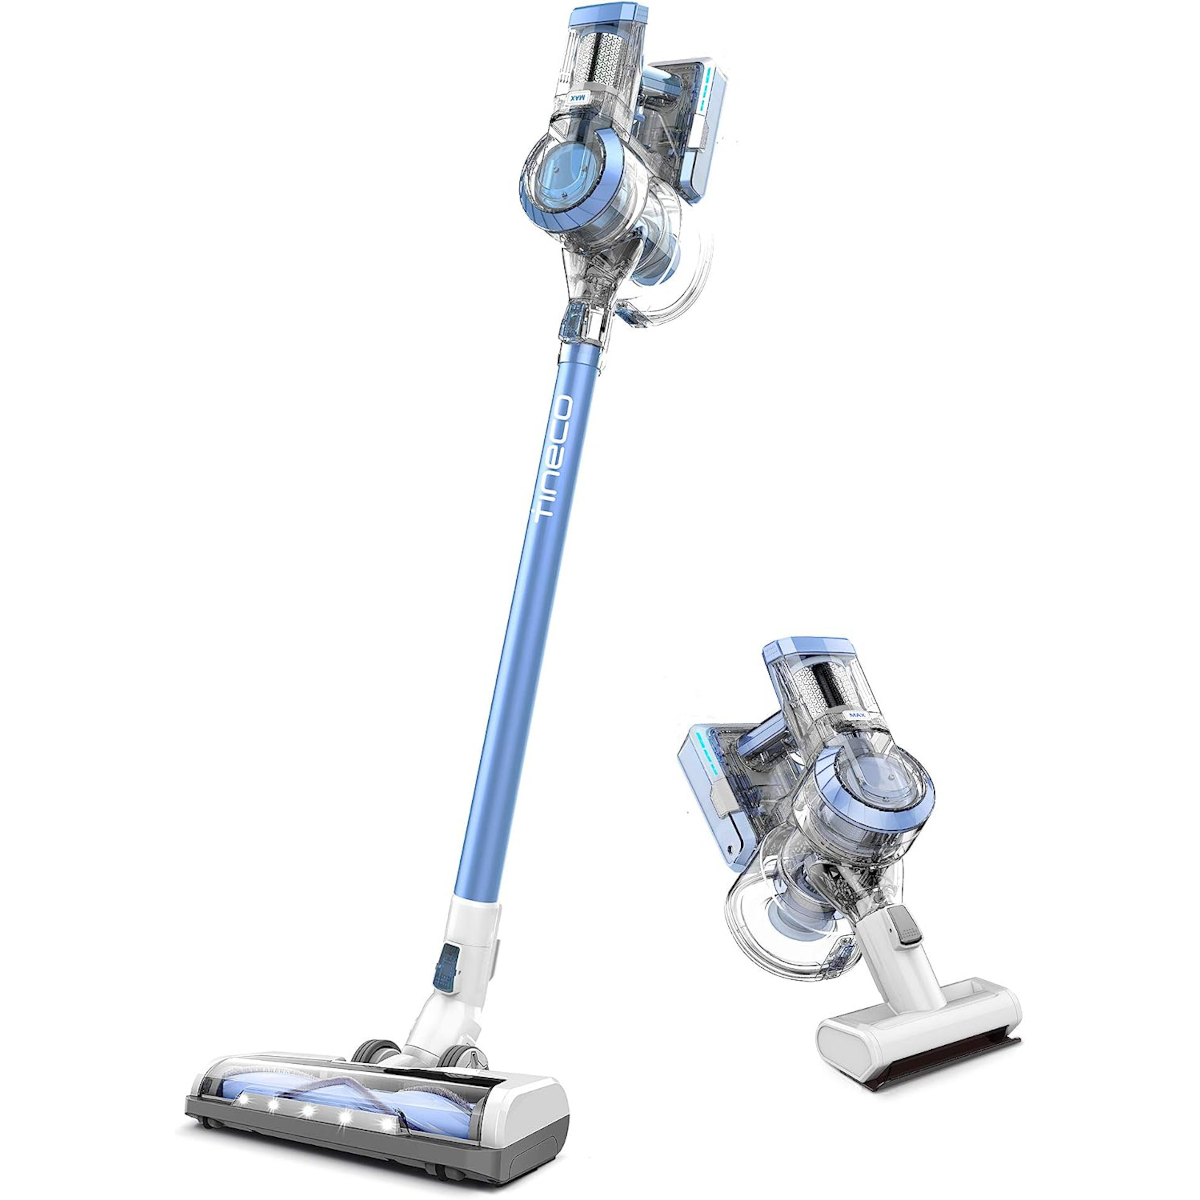 The Tineco A11 Hero Cordless Lightweight Stick Vacuum and its removable hand vacuum on a blank white background.